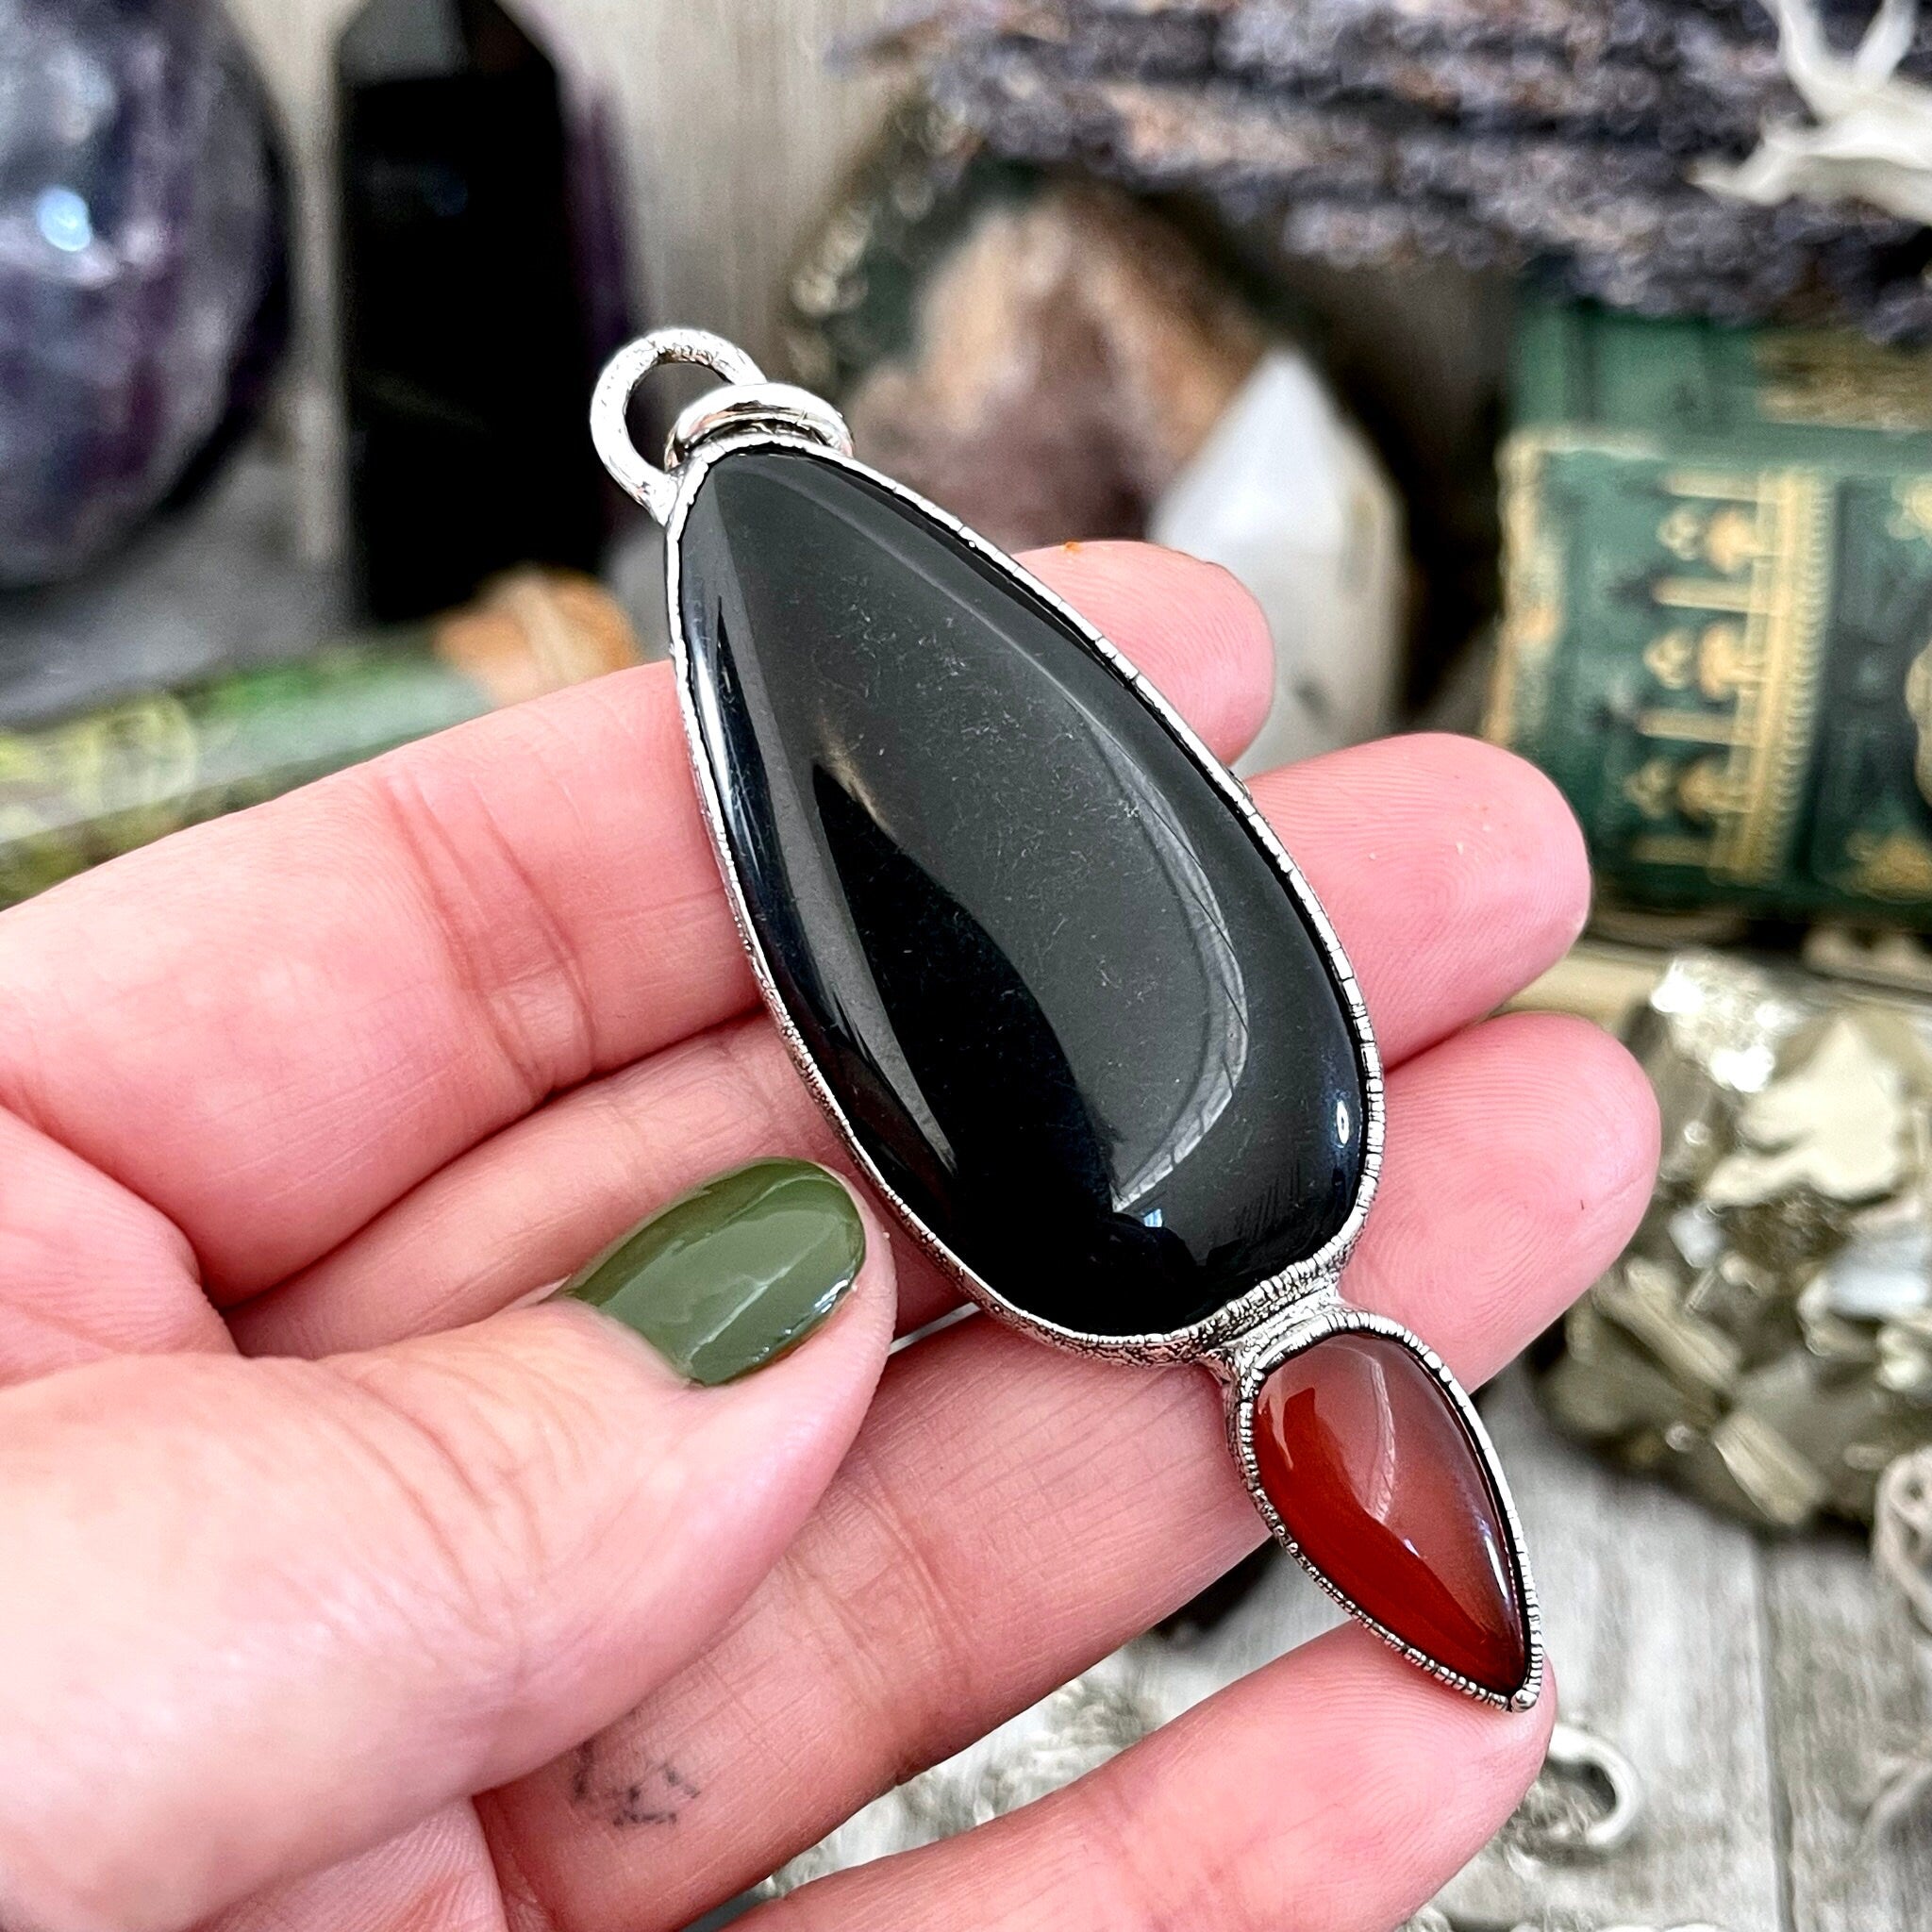 Red Agate Natural Stone Pendant | Carnelian Natural Stone Jewelry - Steel  Chain - Aliexpress